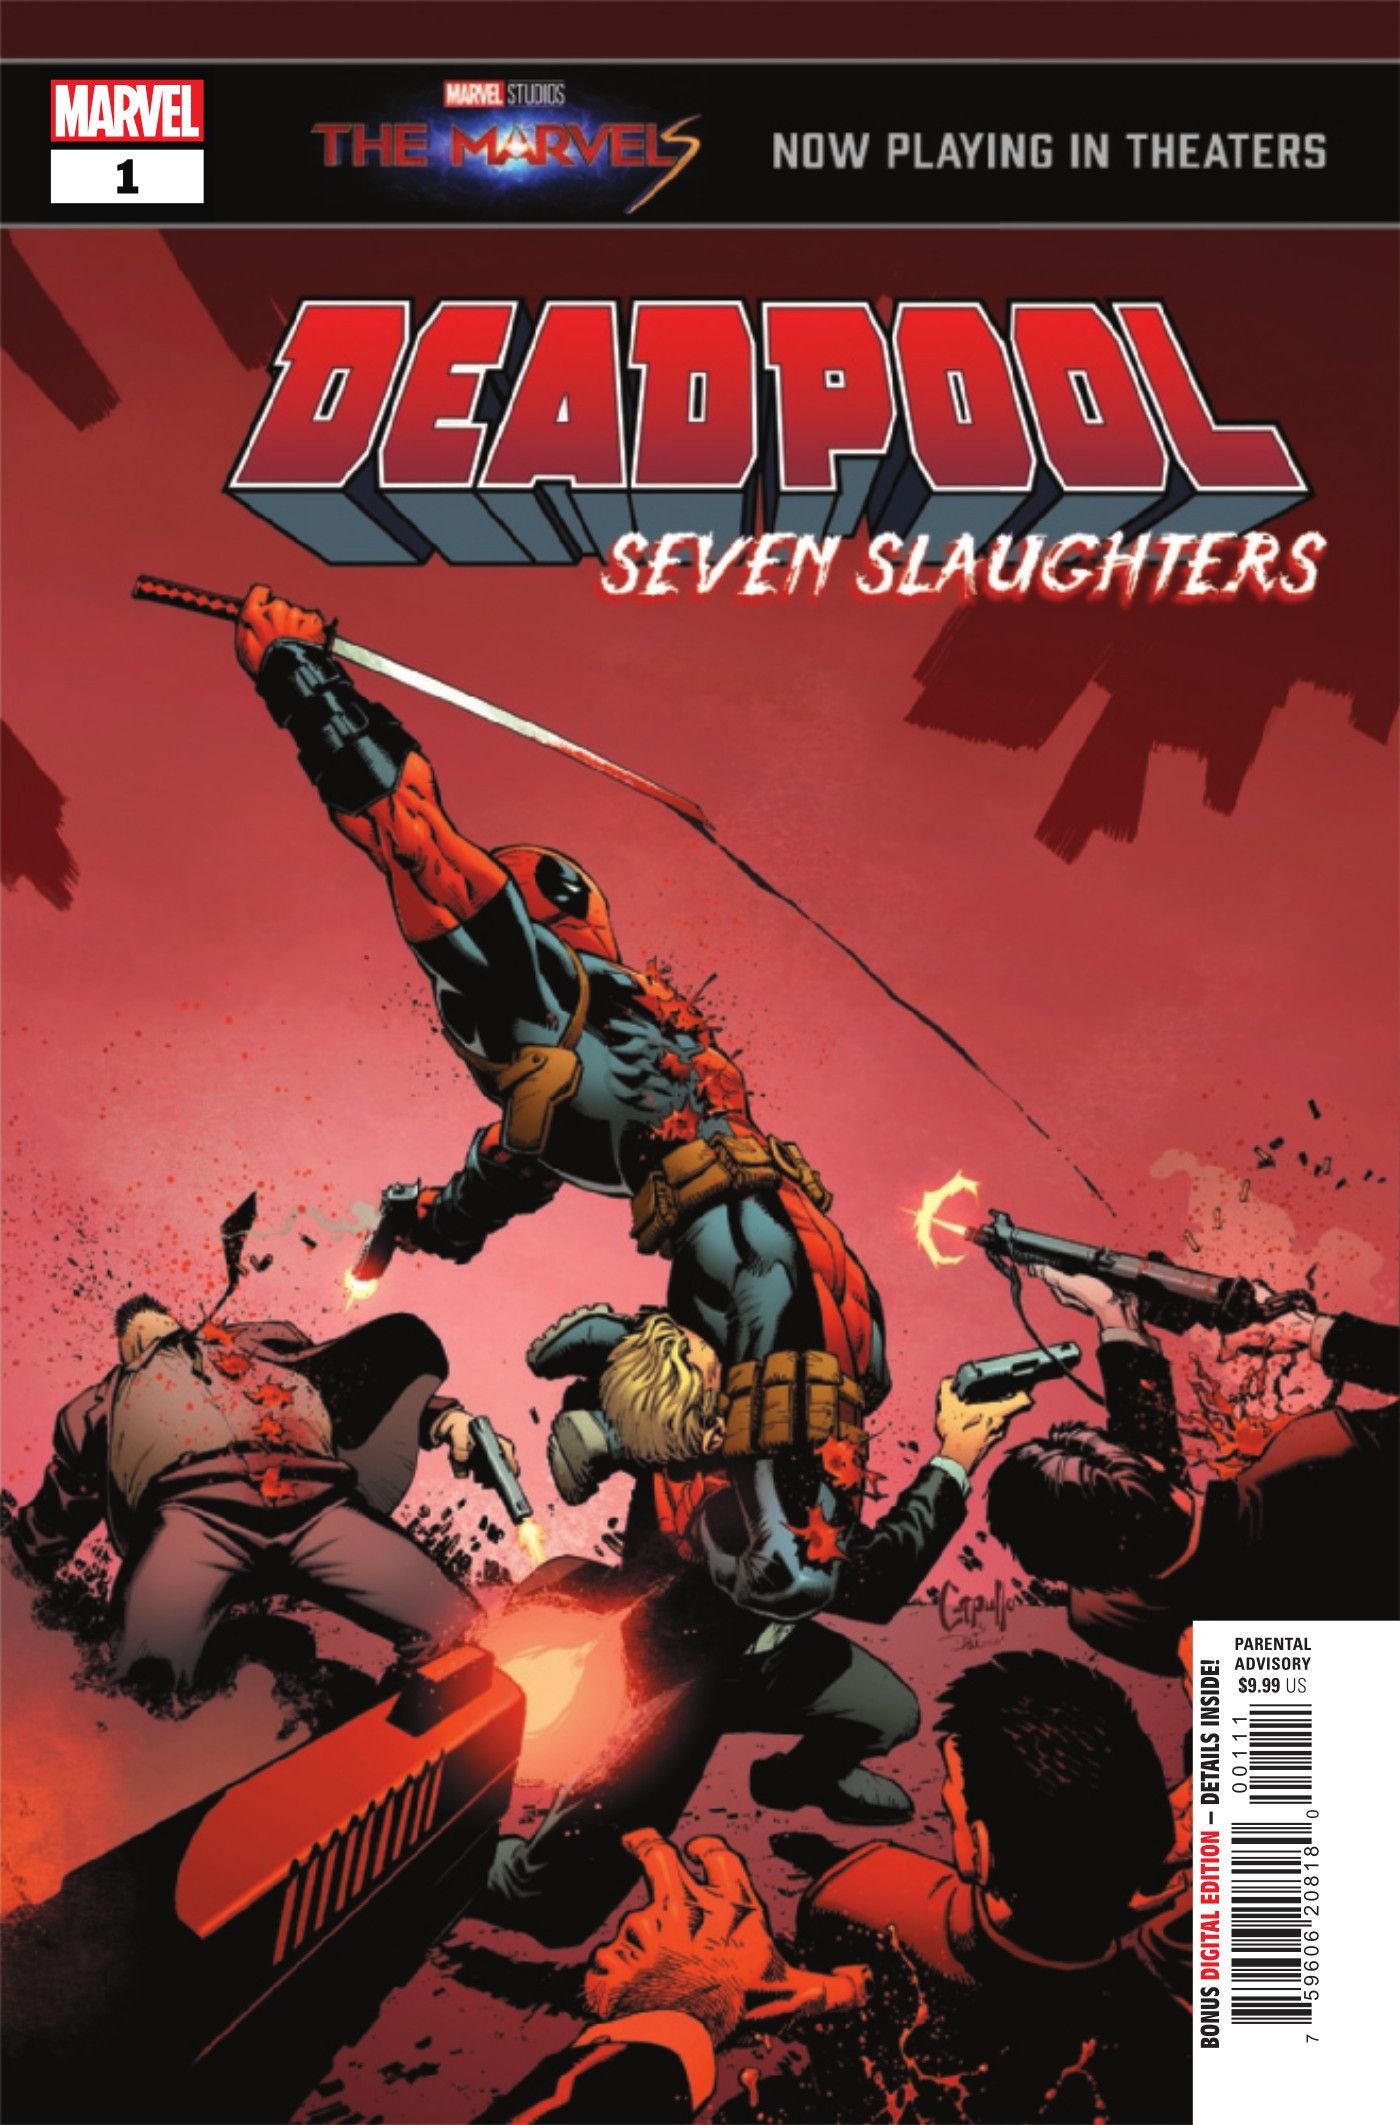 Deadpool: Seven Slaughters #1 ACover by Greg Capullo.